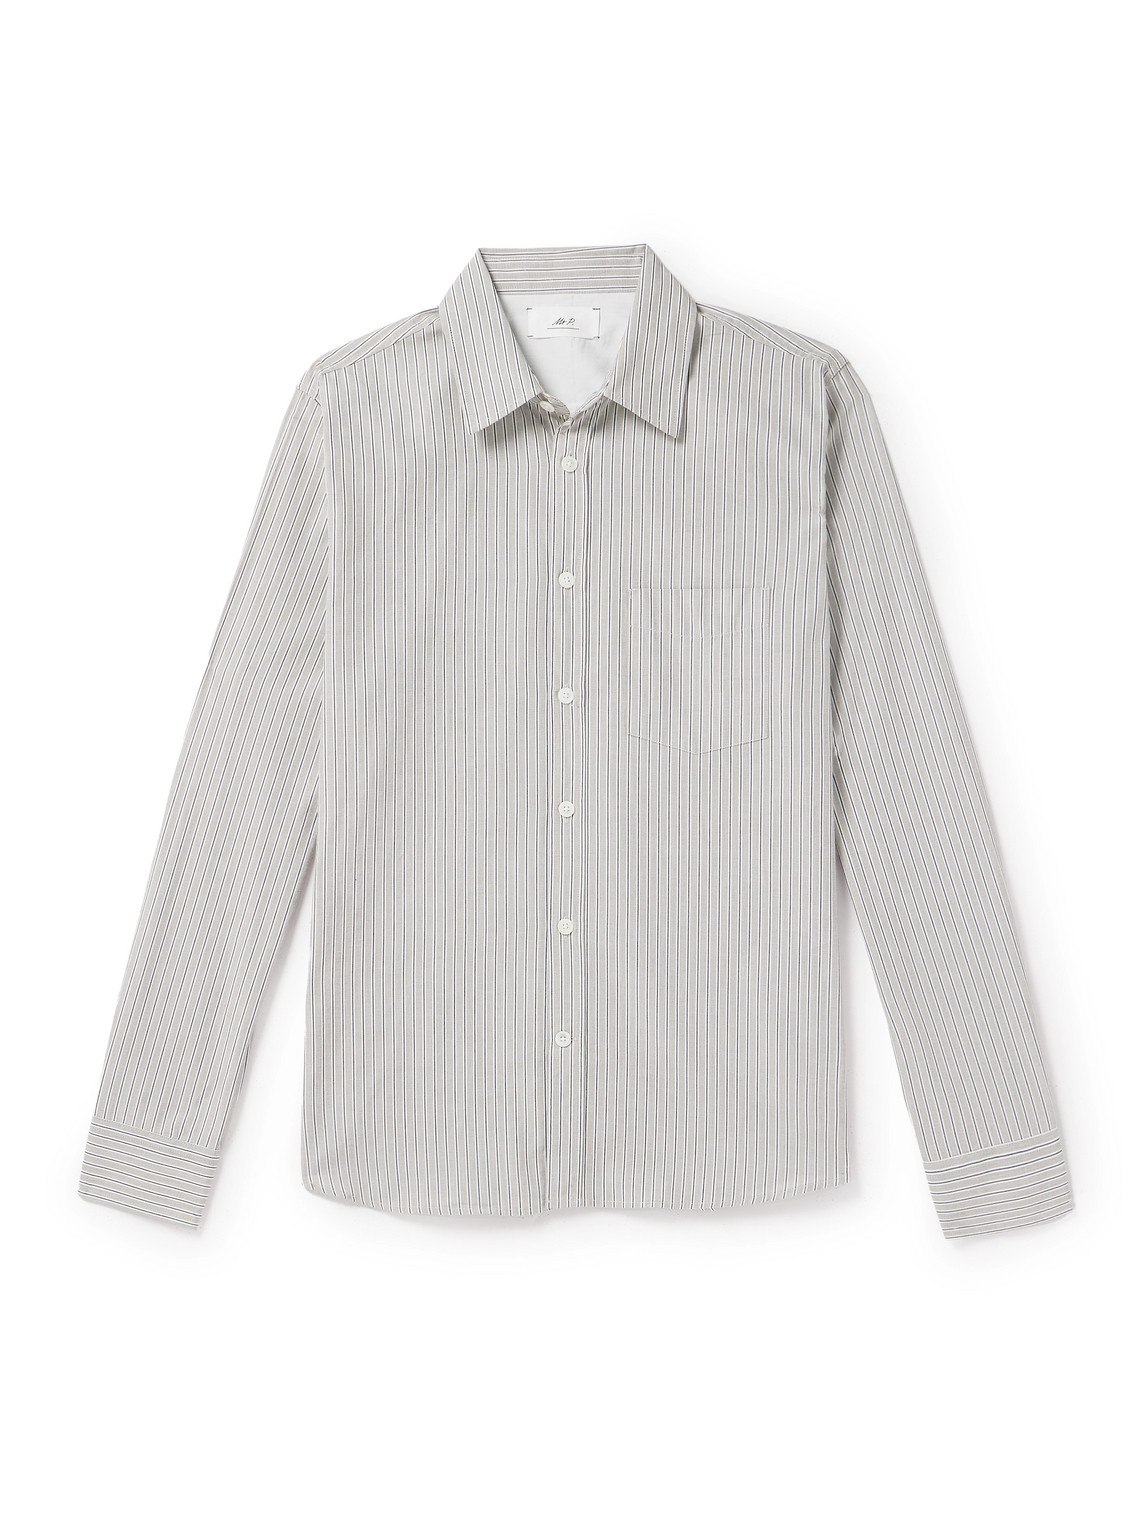 Mr P Pinstriped Cotton Oxford Shirt In Gray